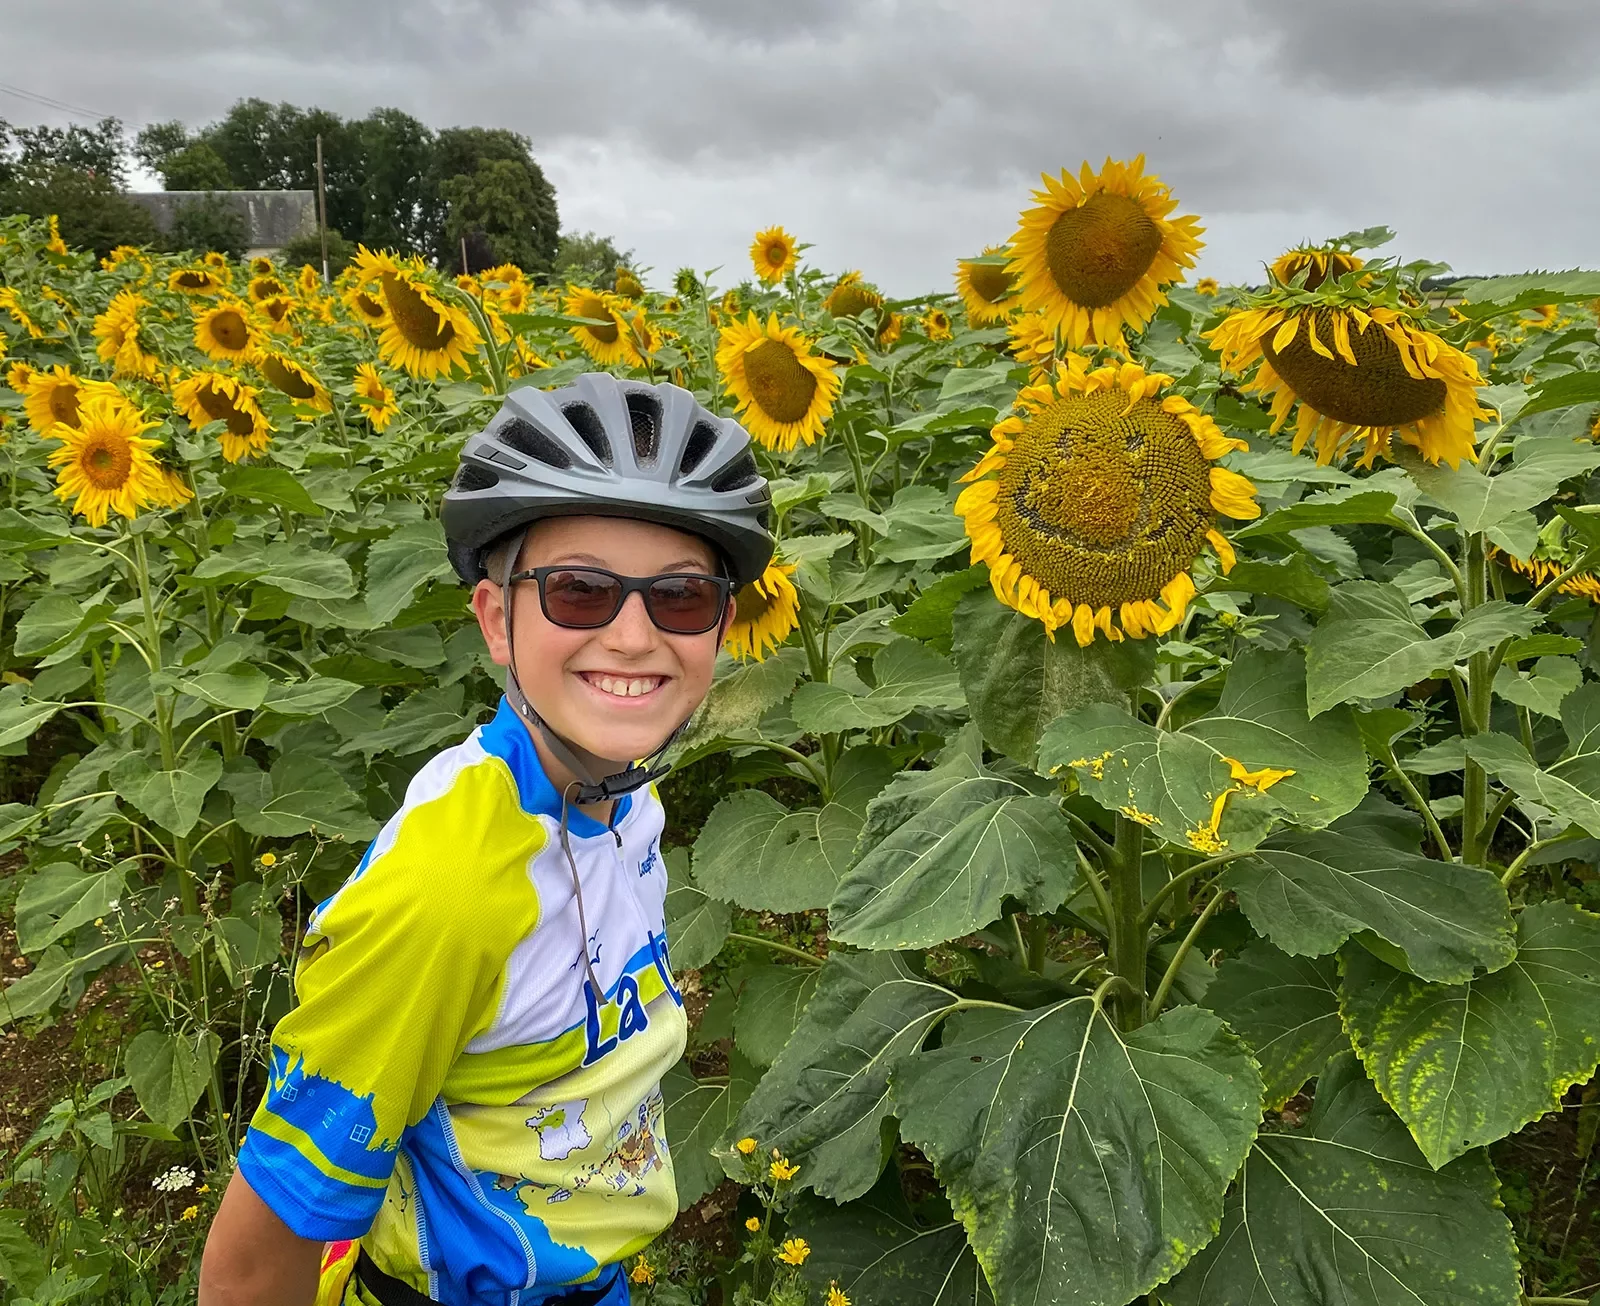 Guest posing in front of large sunflower field.